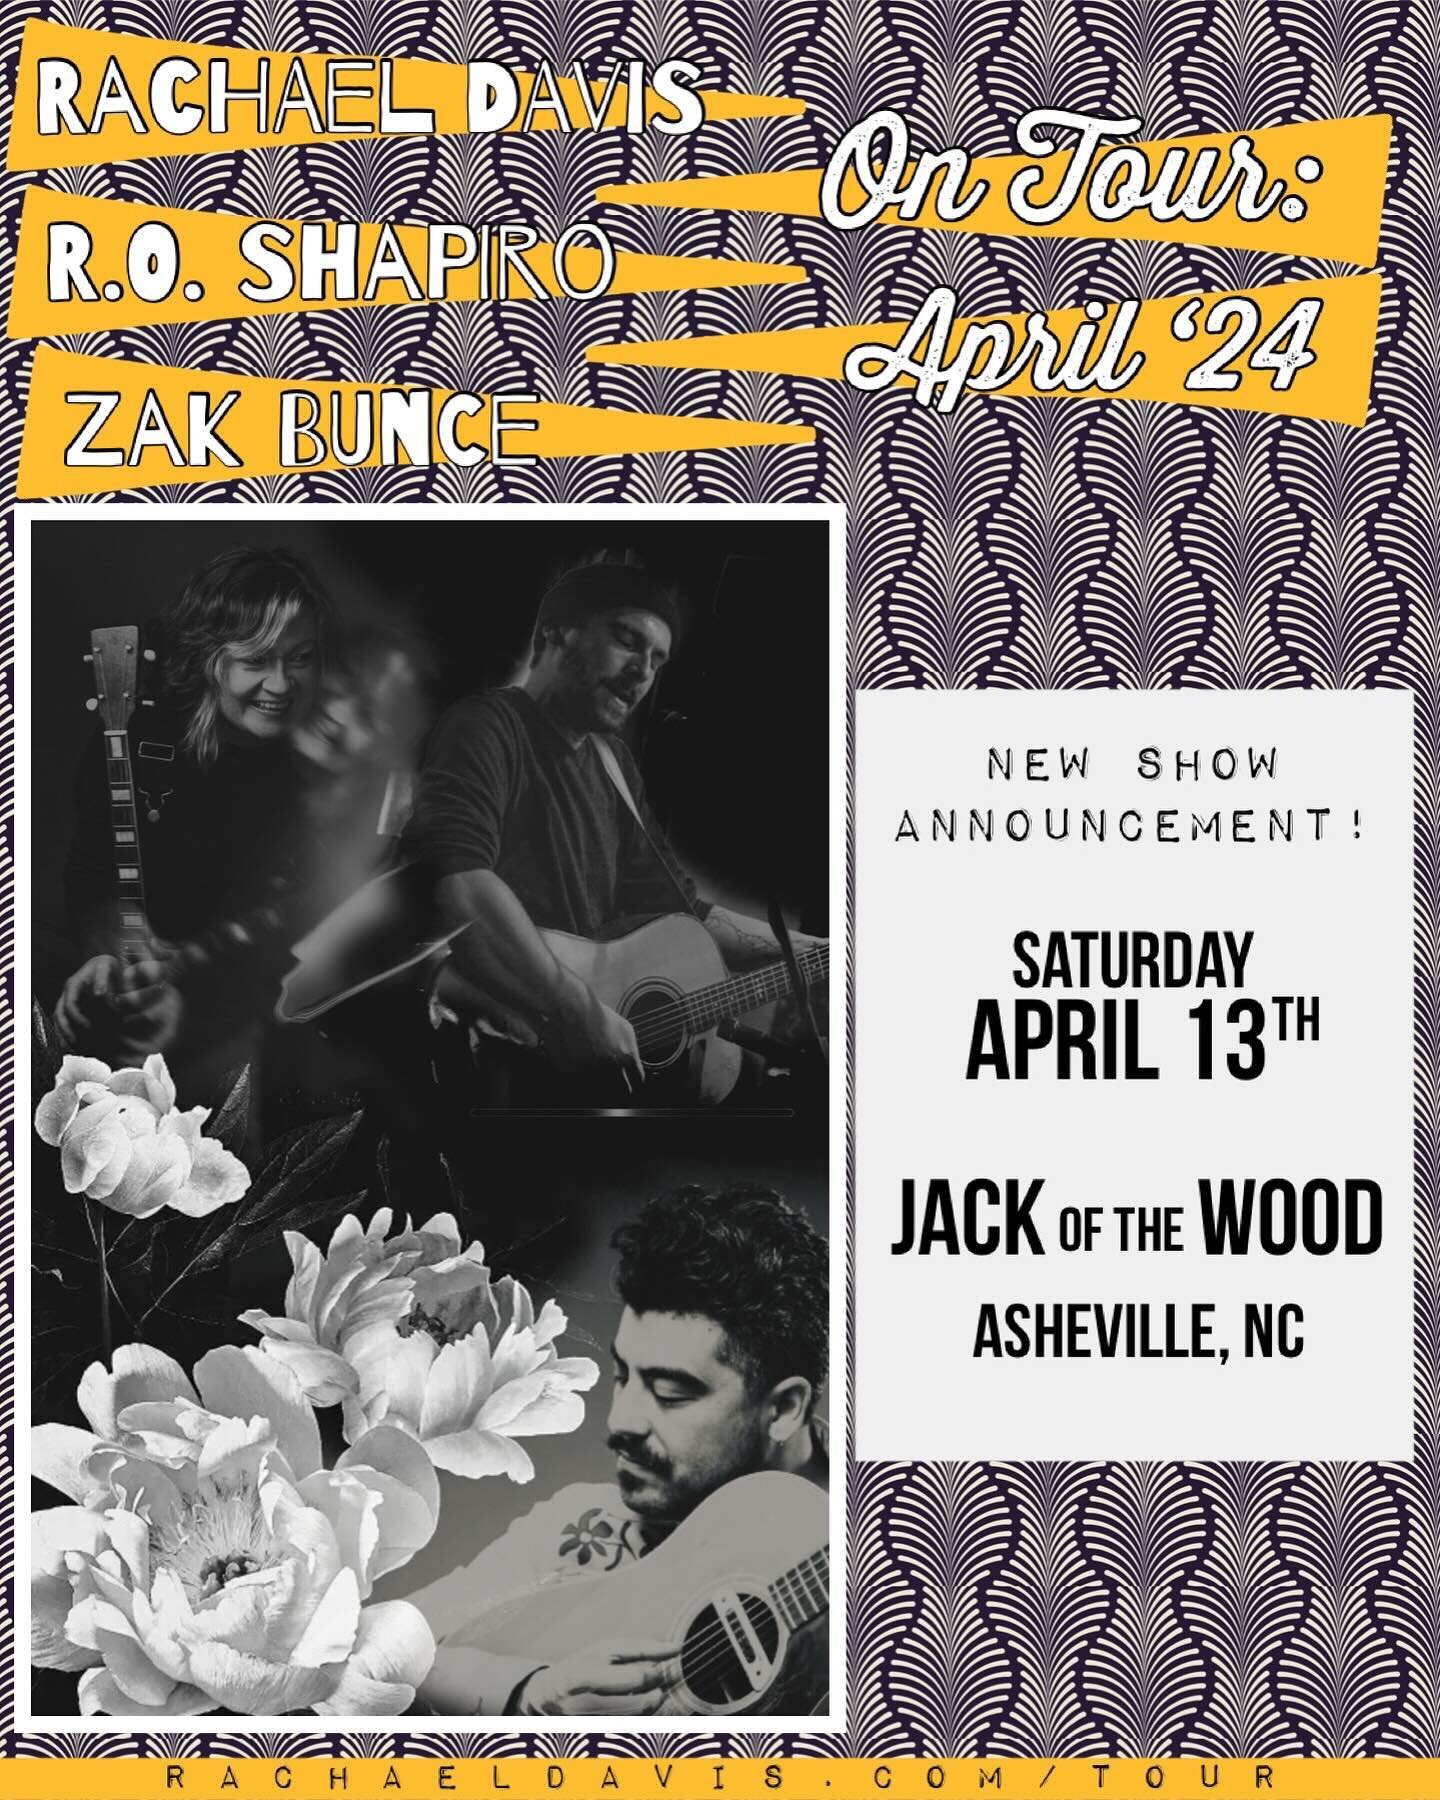 More exciting news! We recently added a new show! I&rsquo;ve wanted to play at @jackofthewood for years! Now I get to play there with my bro @zakbuncemusic and my buddy @r.o.shapiro! Go to the Link tree in my bio and put the tour button for show info